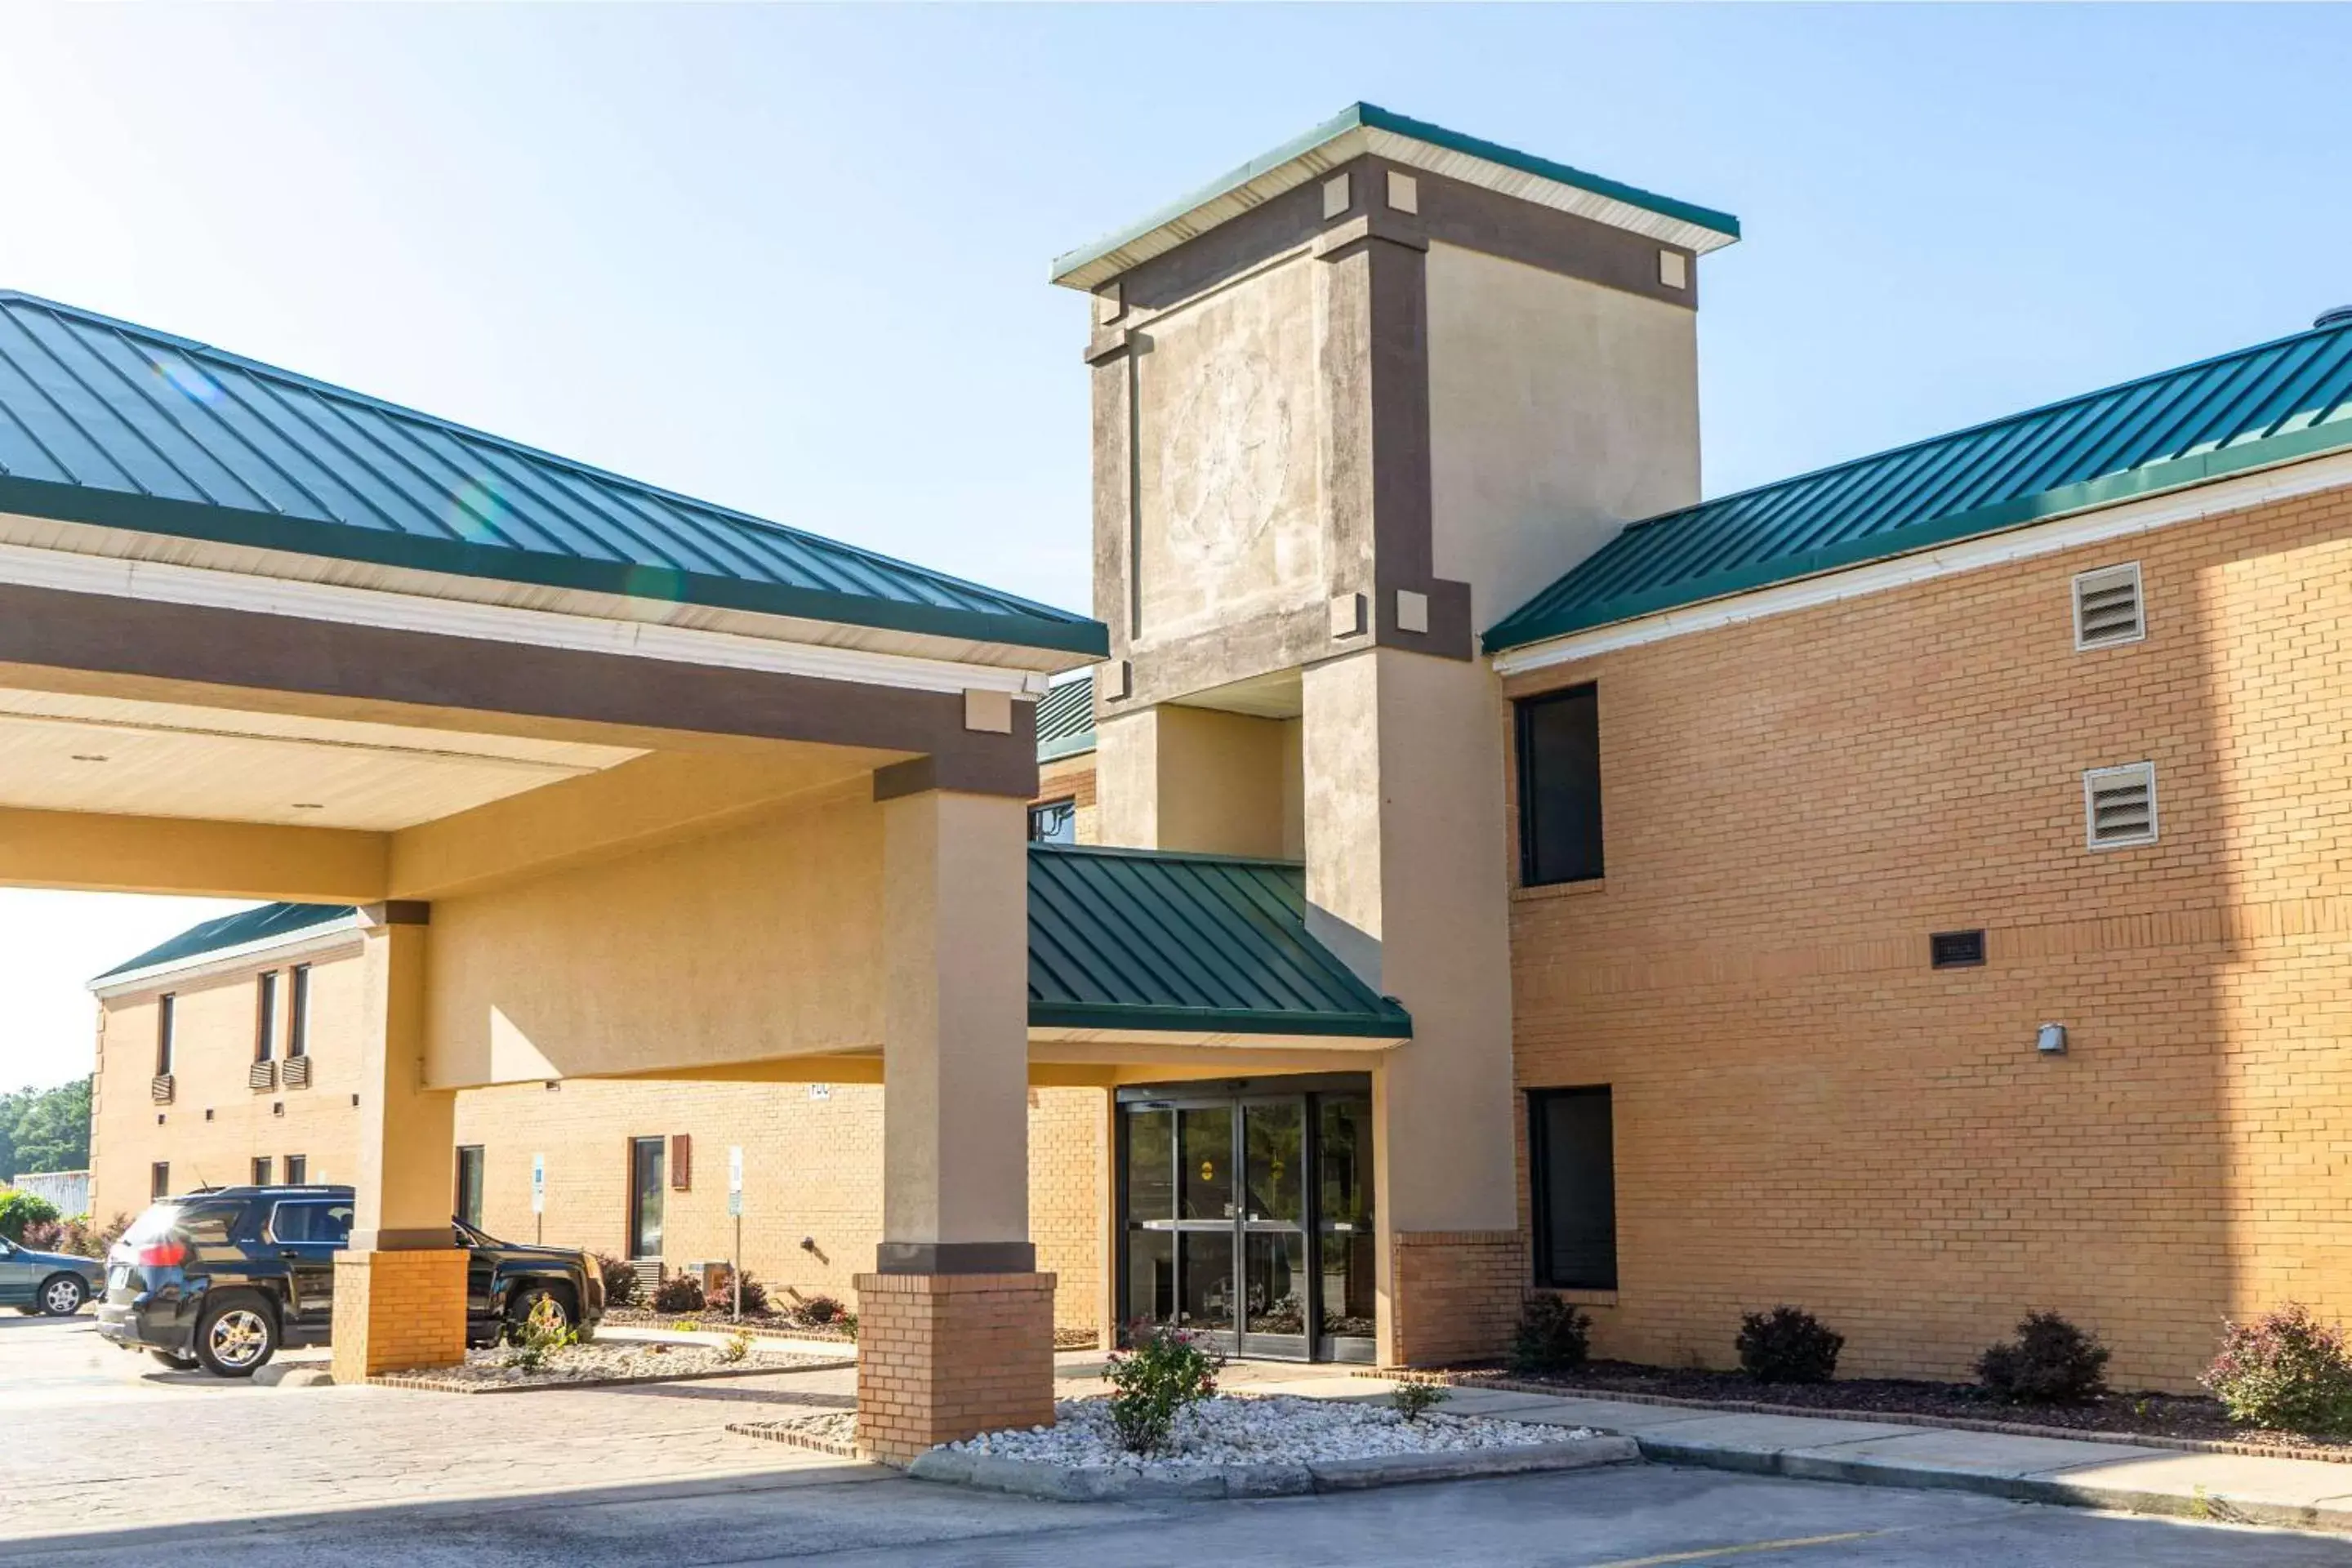 Property Building in Quality Inn Whiteville North